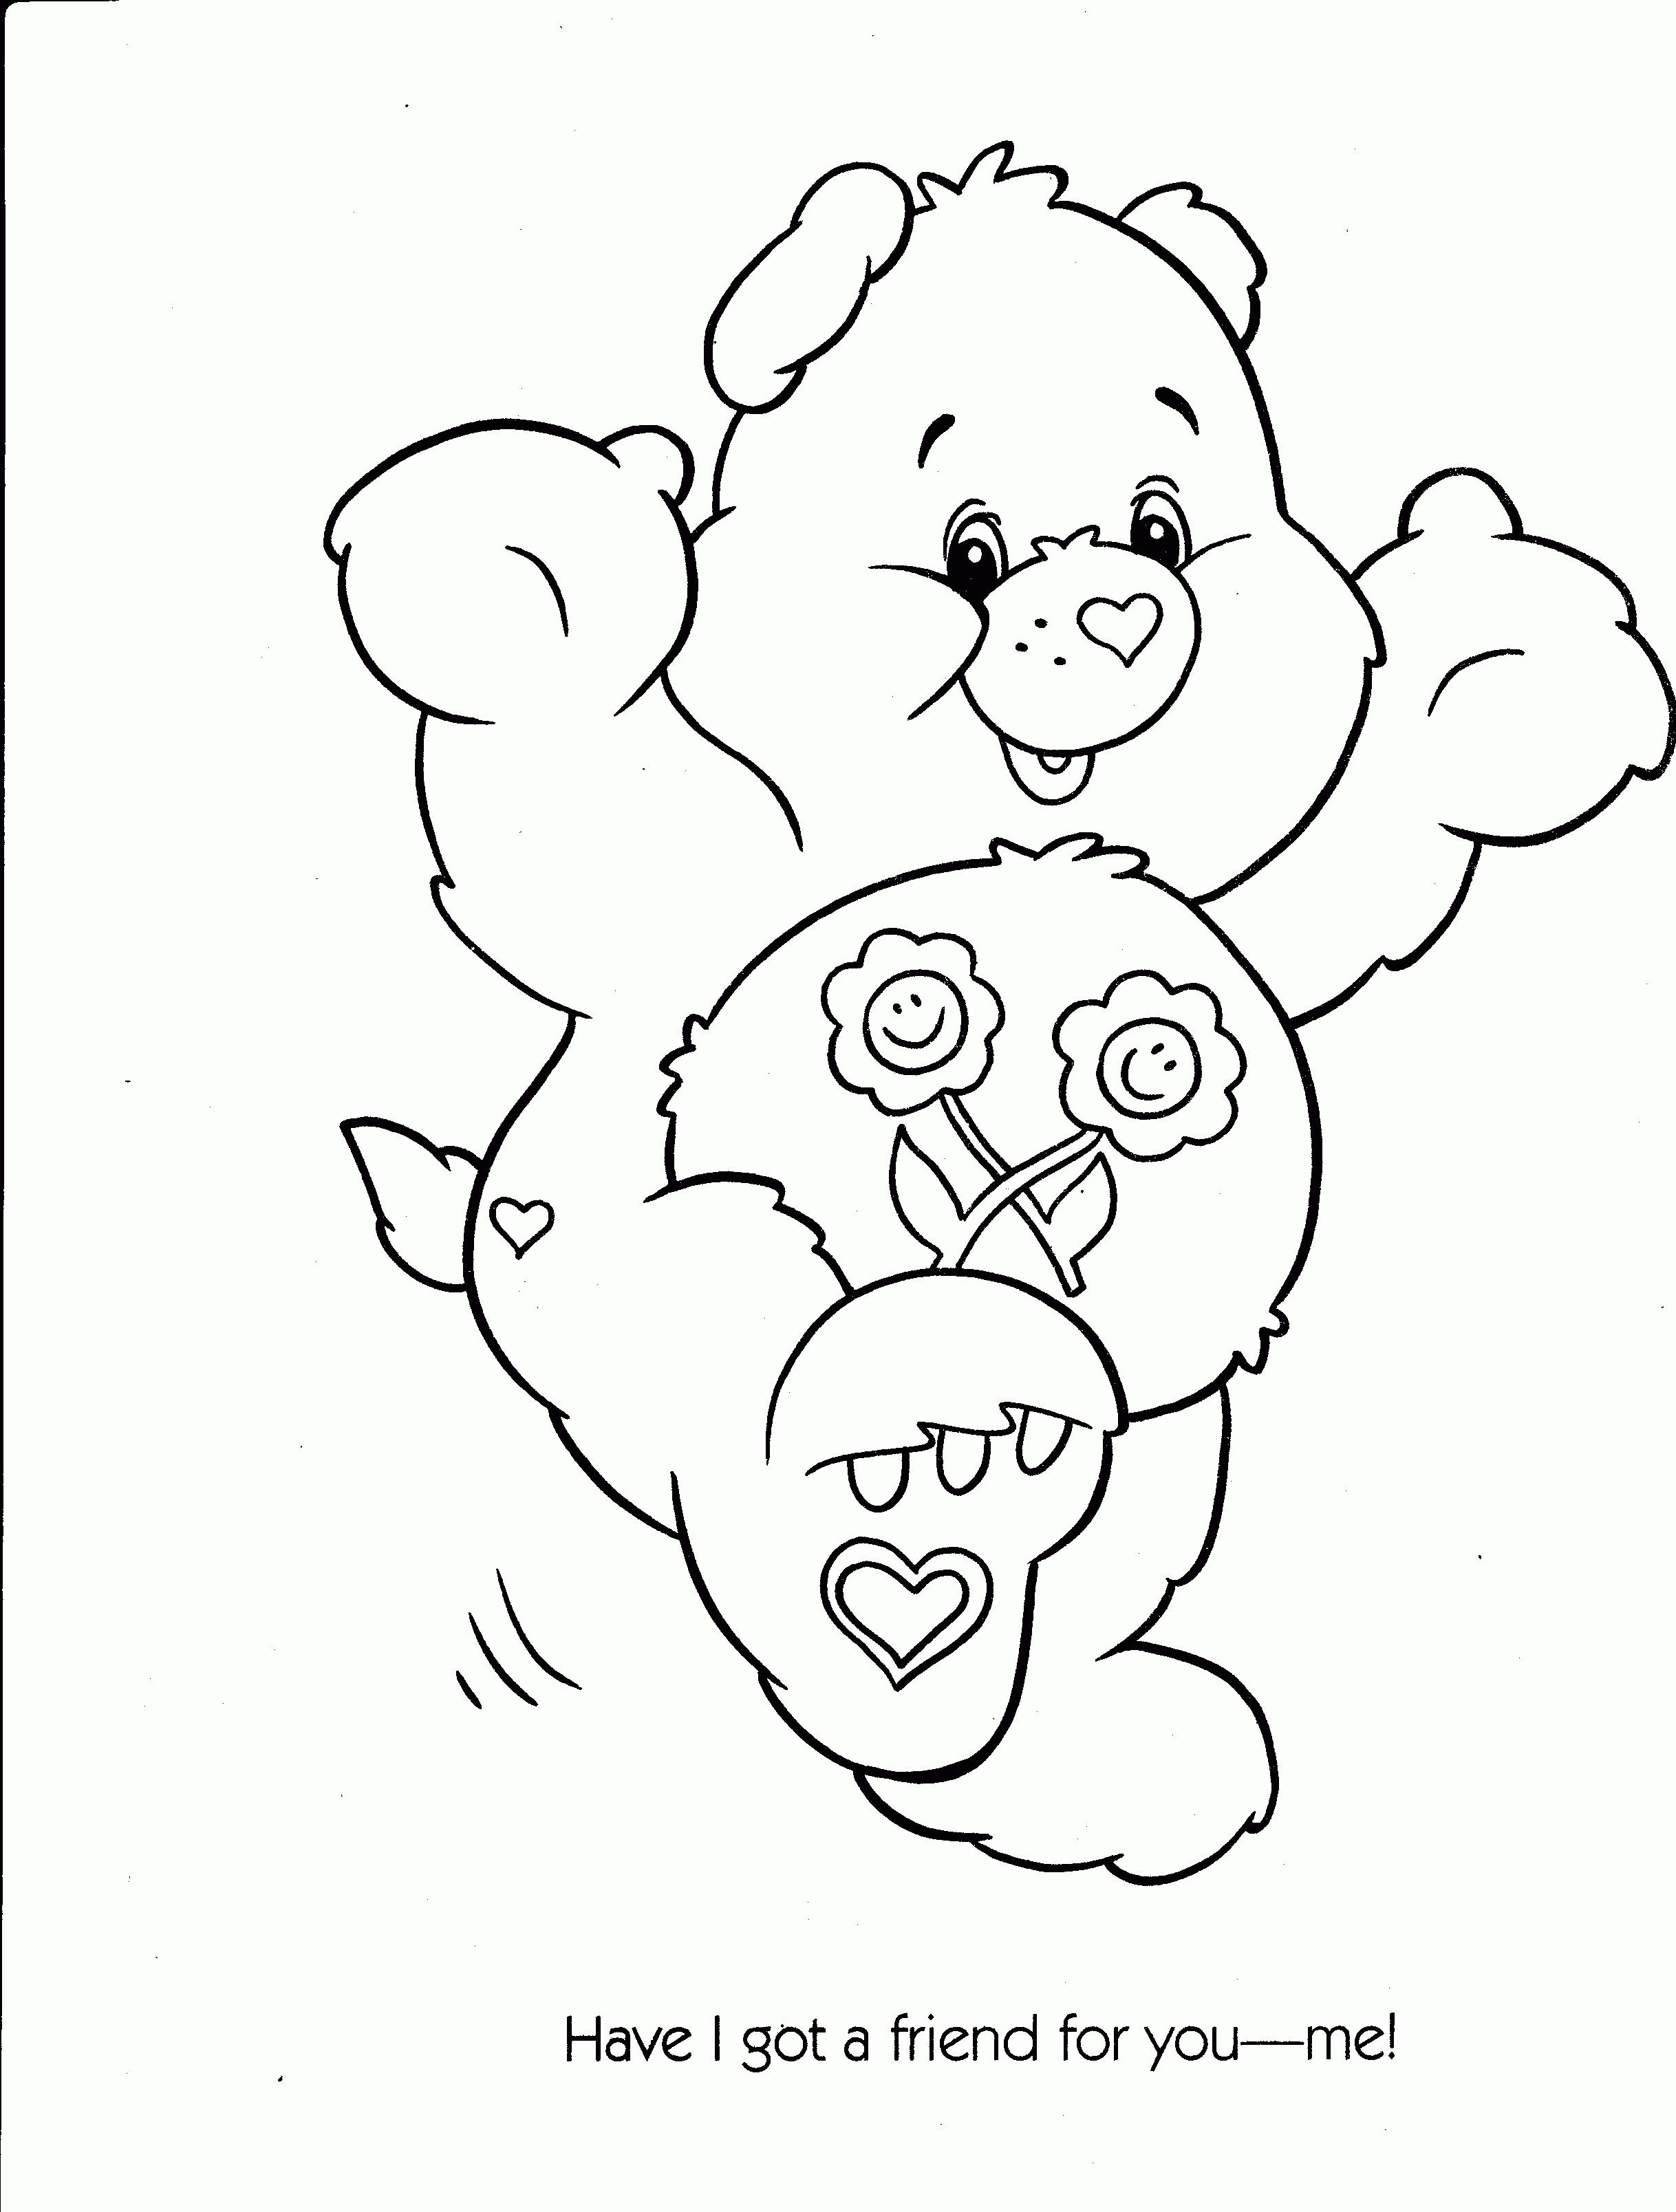 Care Bears Dog Coloring Pages - Coloring Pages For All Ages